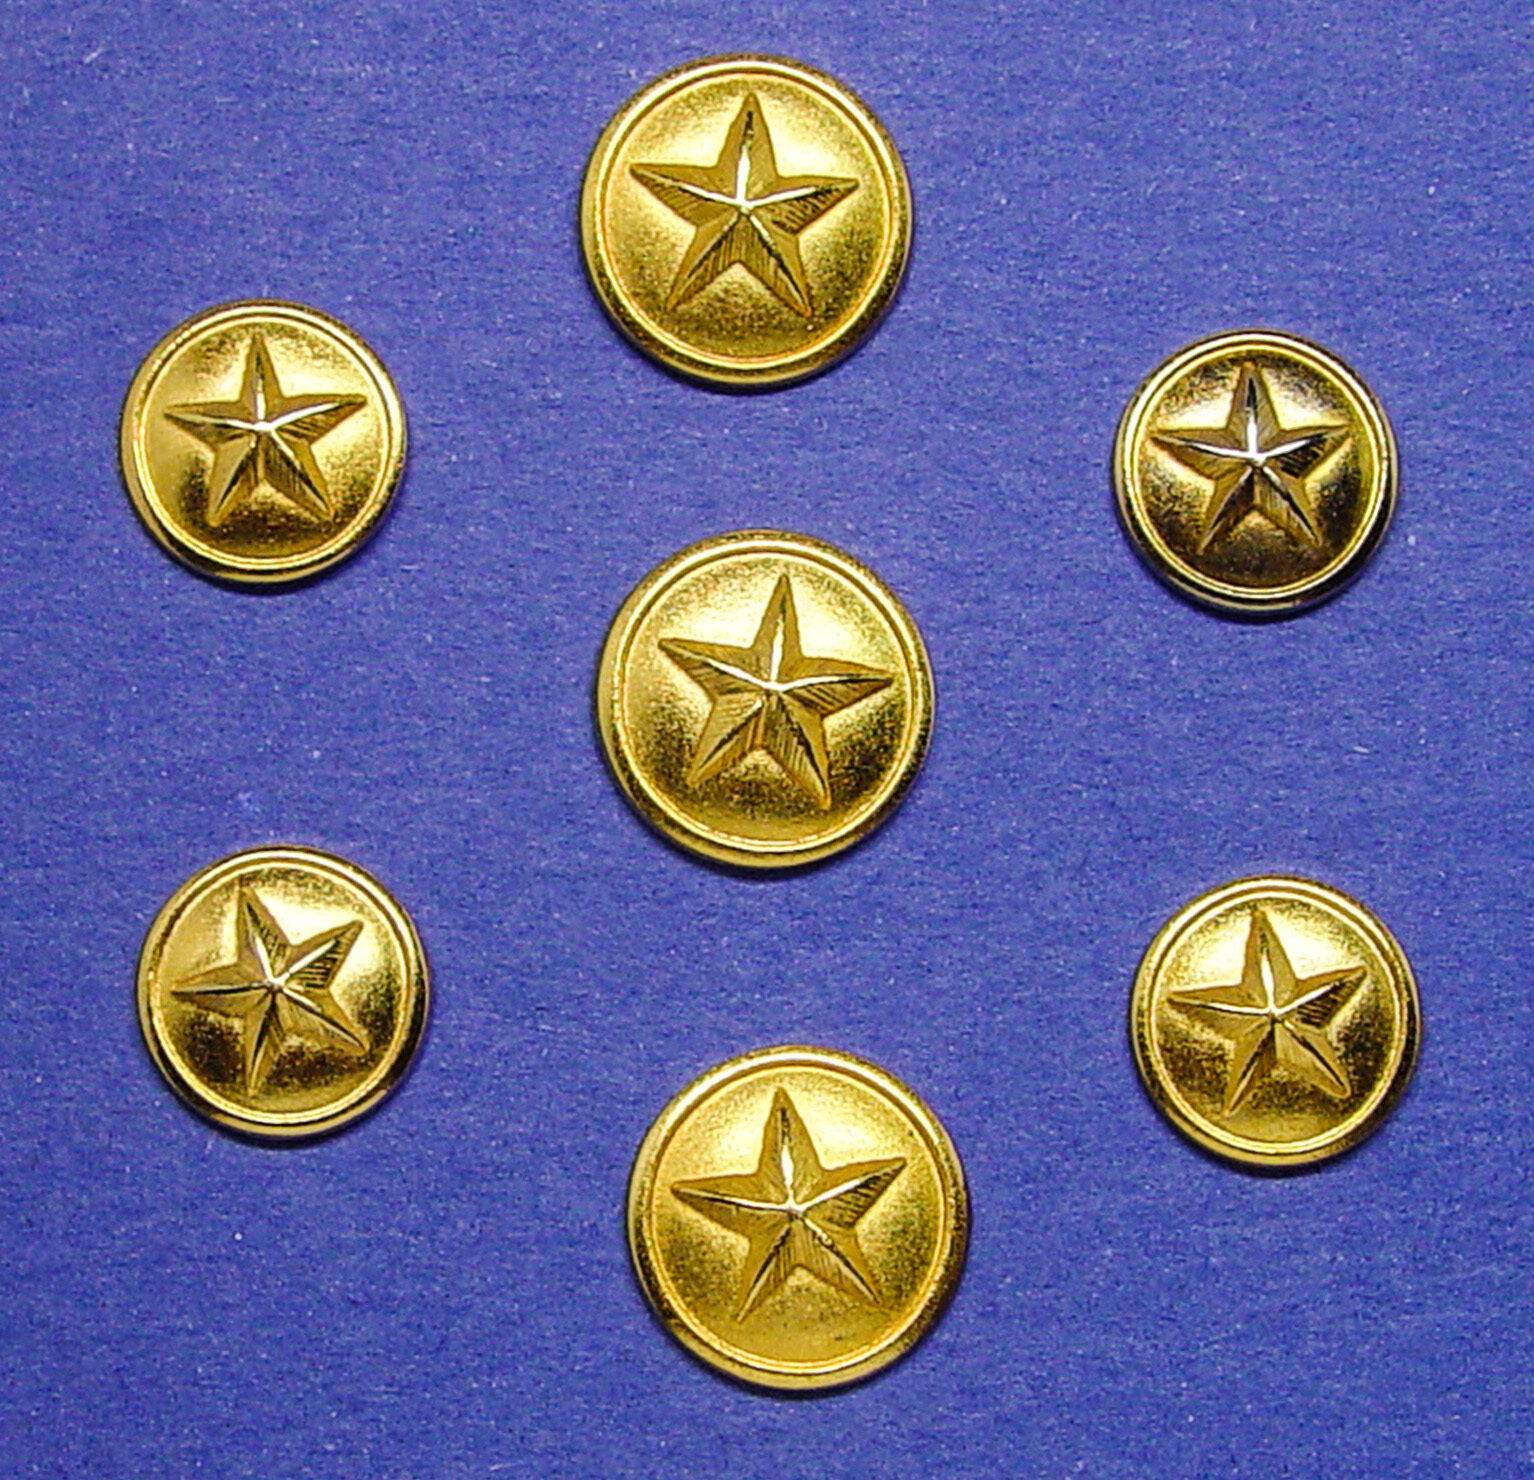 SET OF 7 BRUSH GOLDEN STAR THEME BUTTONS 3 FRONT CLOSURE & 4 ACCENT CUFF BUTTONS